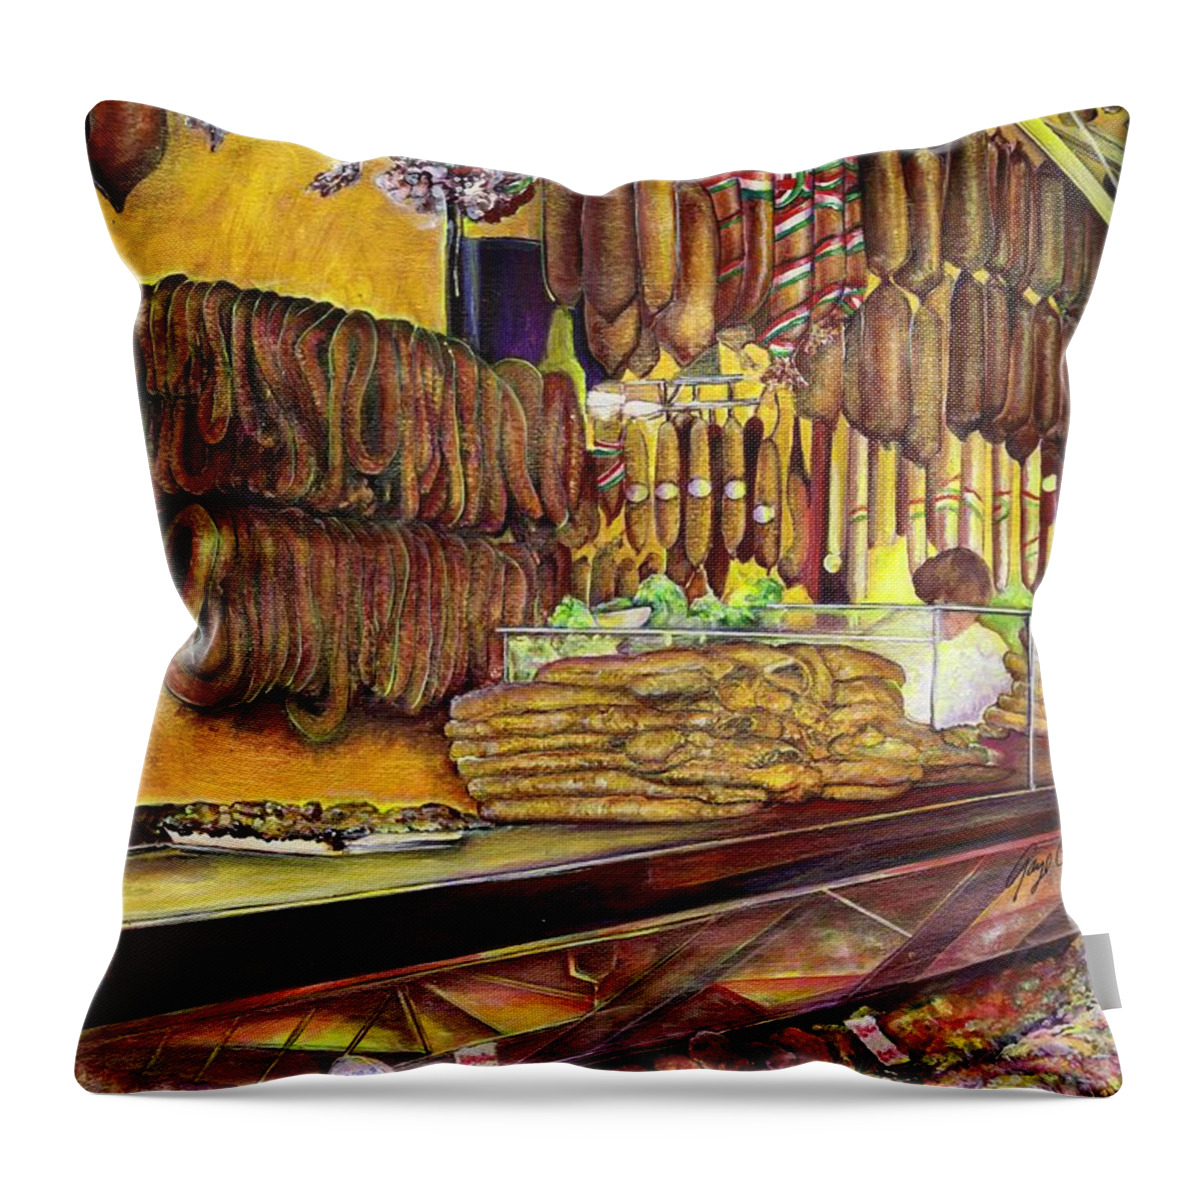 Gaye Elise Beda Throw Pillow featuring the painting Pig Budapest Hungary by Gaye Elise Beda